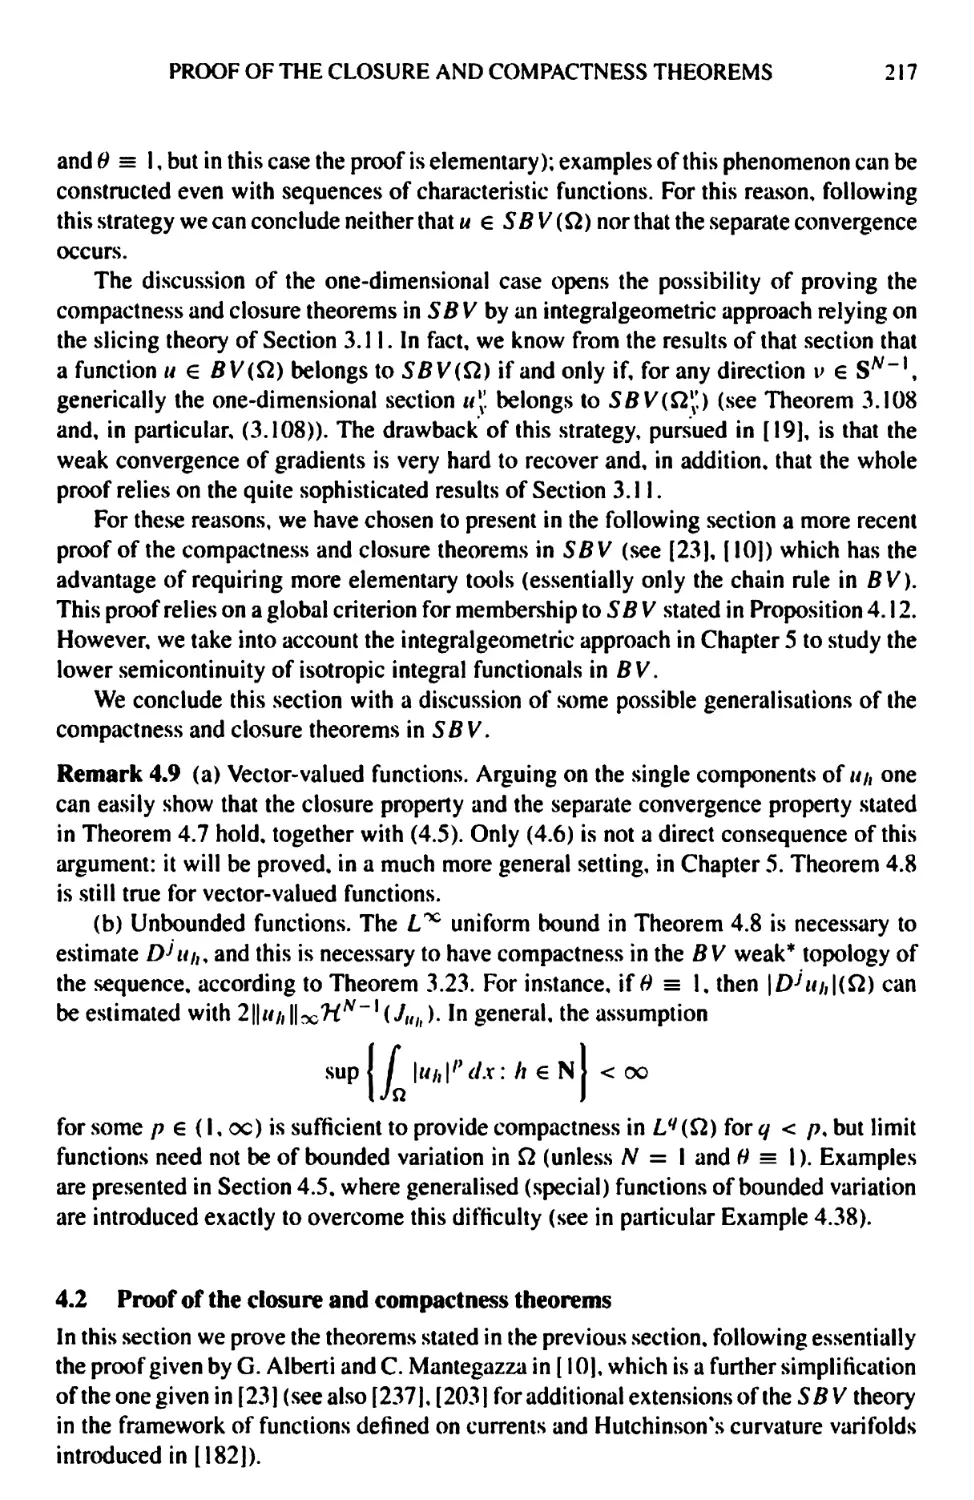 4.2 Proof of the closure and compactness theorems